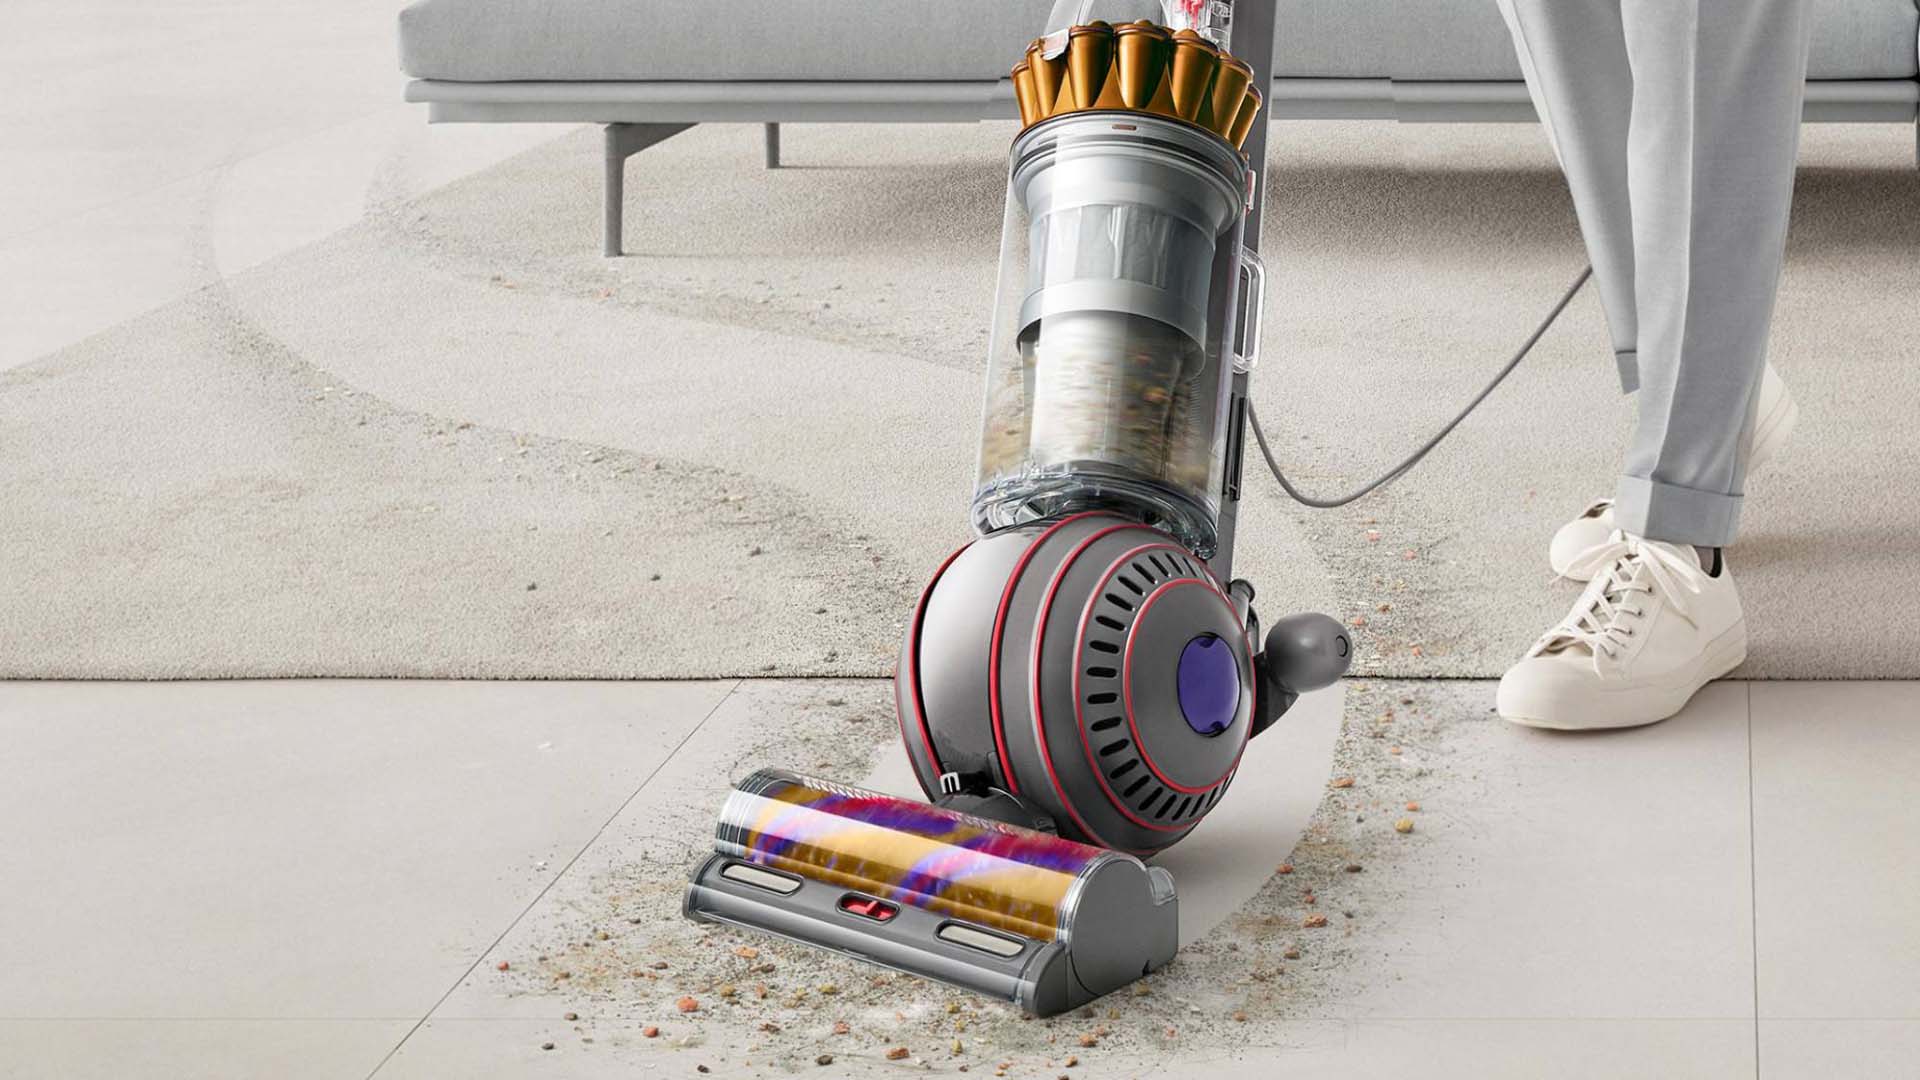 The Ball upright vacuum cleaner is the cheapest Dyson available at the moment